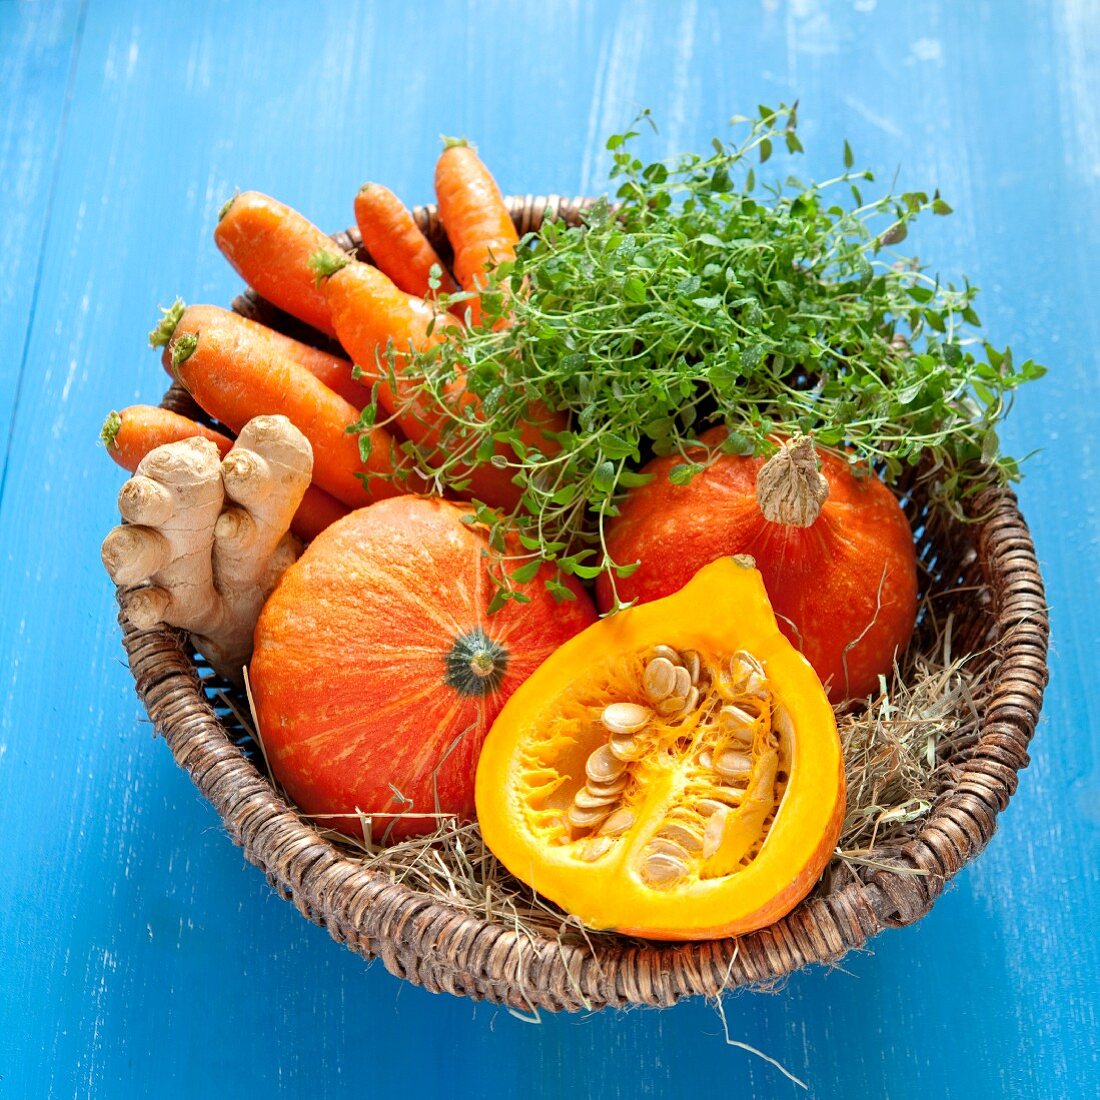 Ingredients for squash soup in a basket